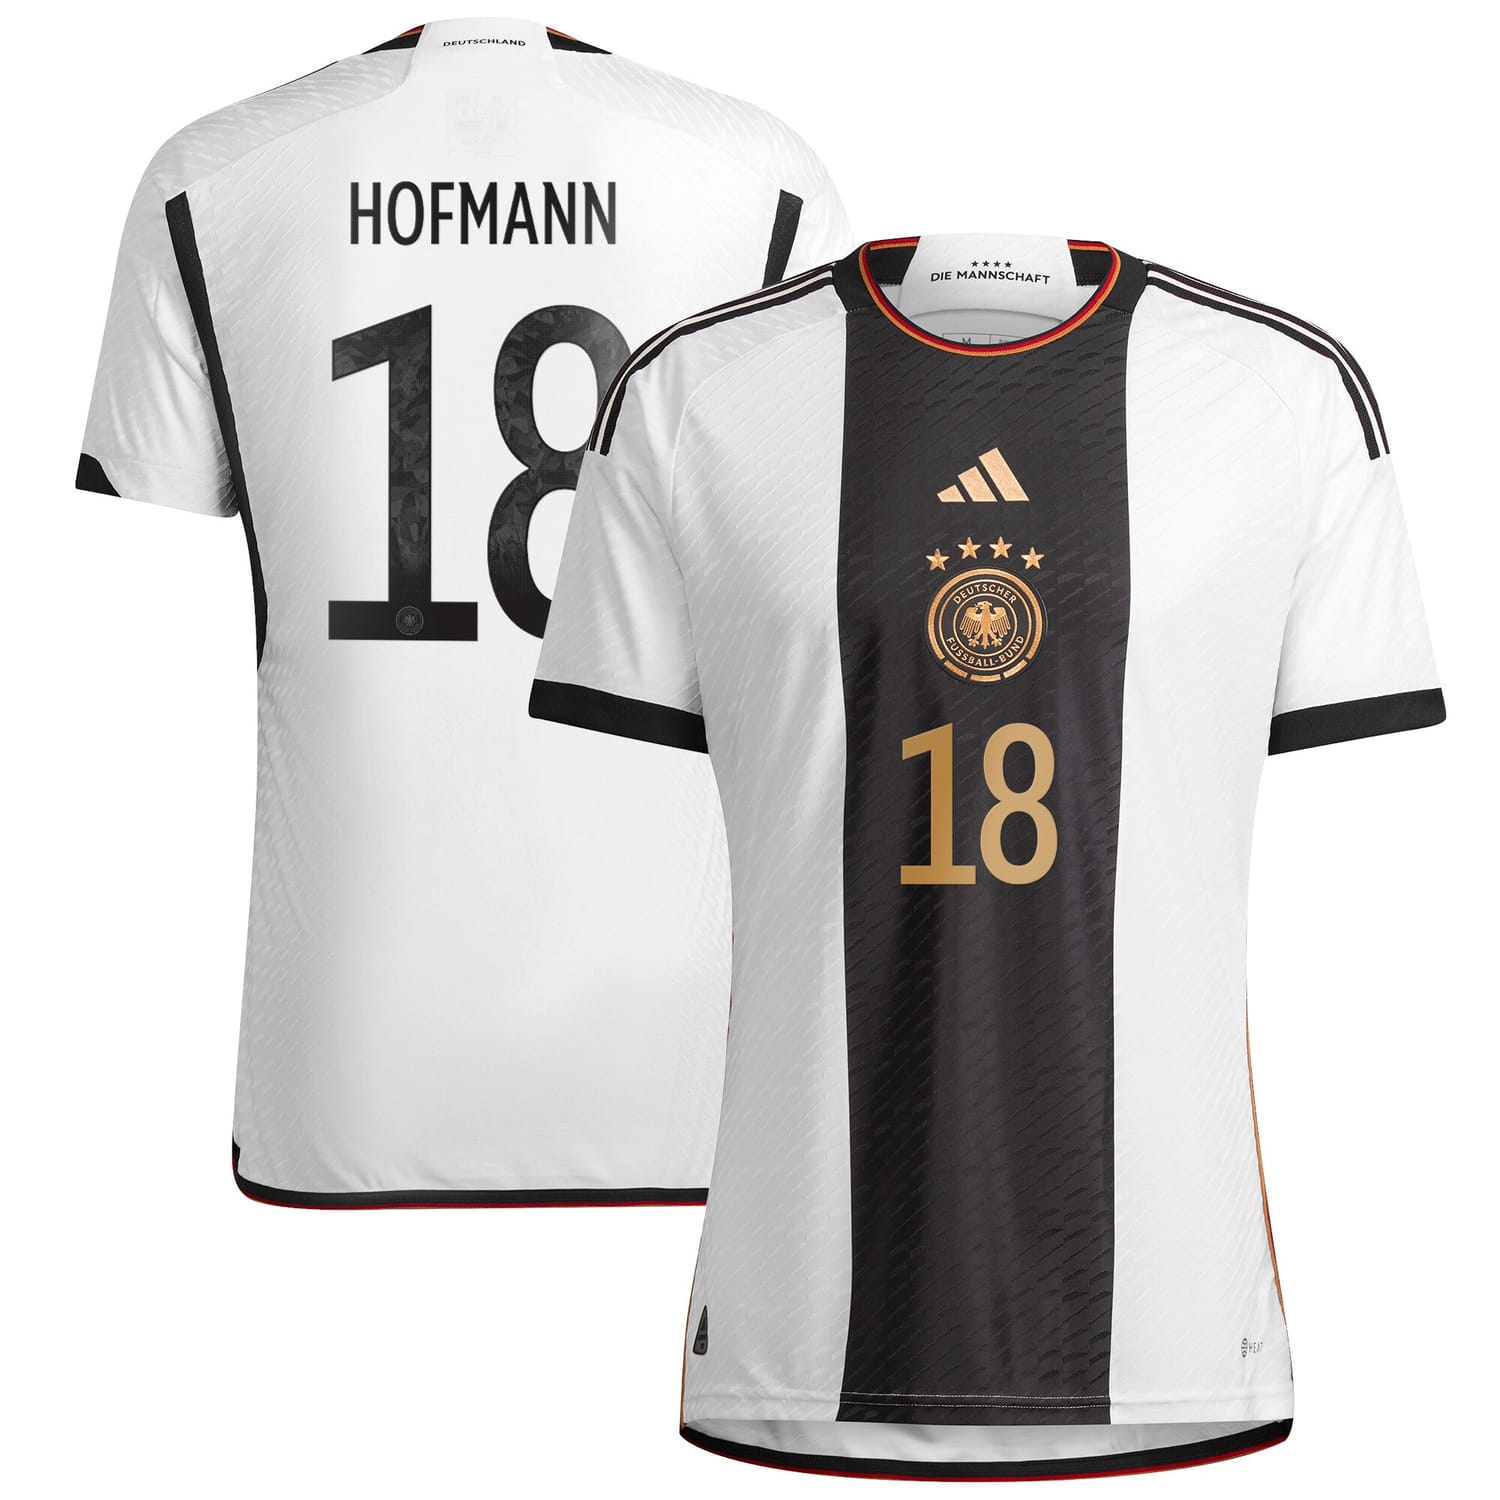 Germany National Team Home Authentic Jersey Shirt player Jonas Hofmann 18 printing for Men